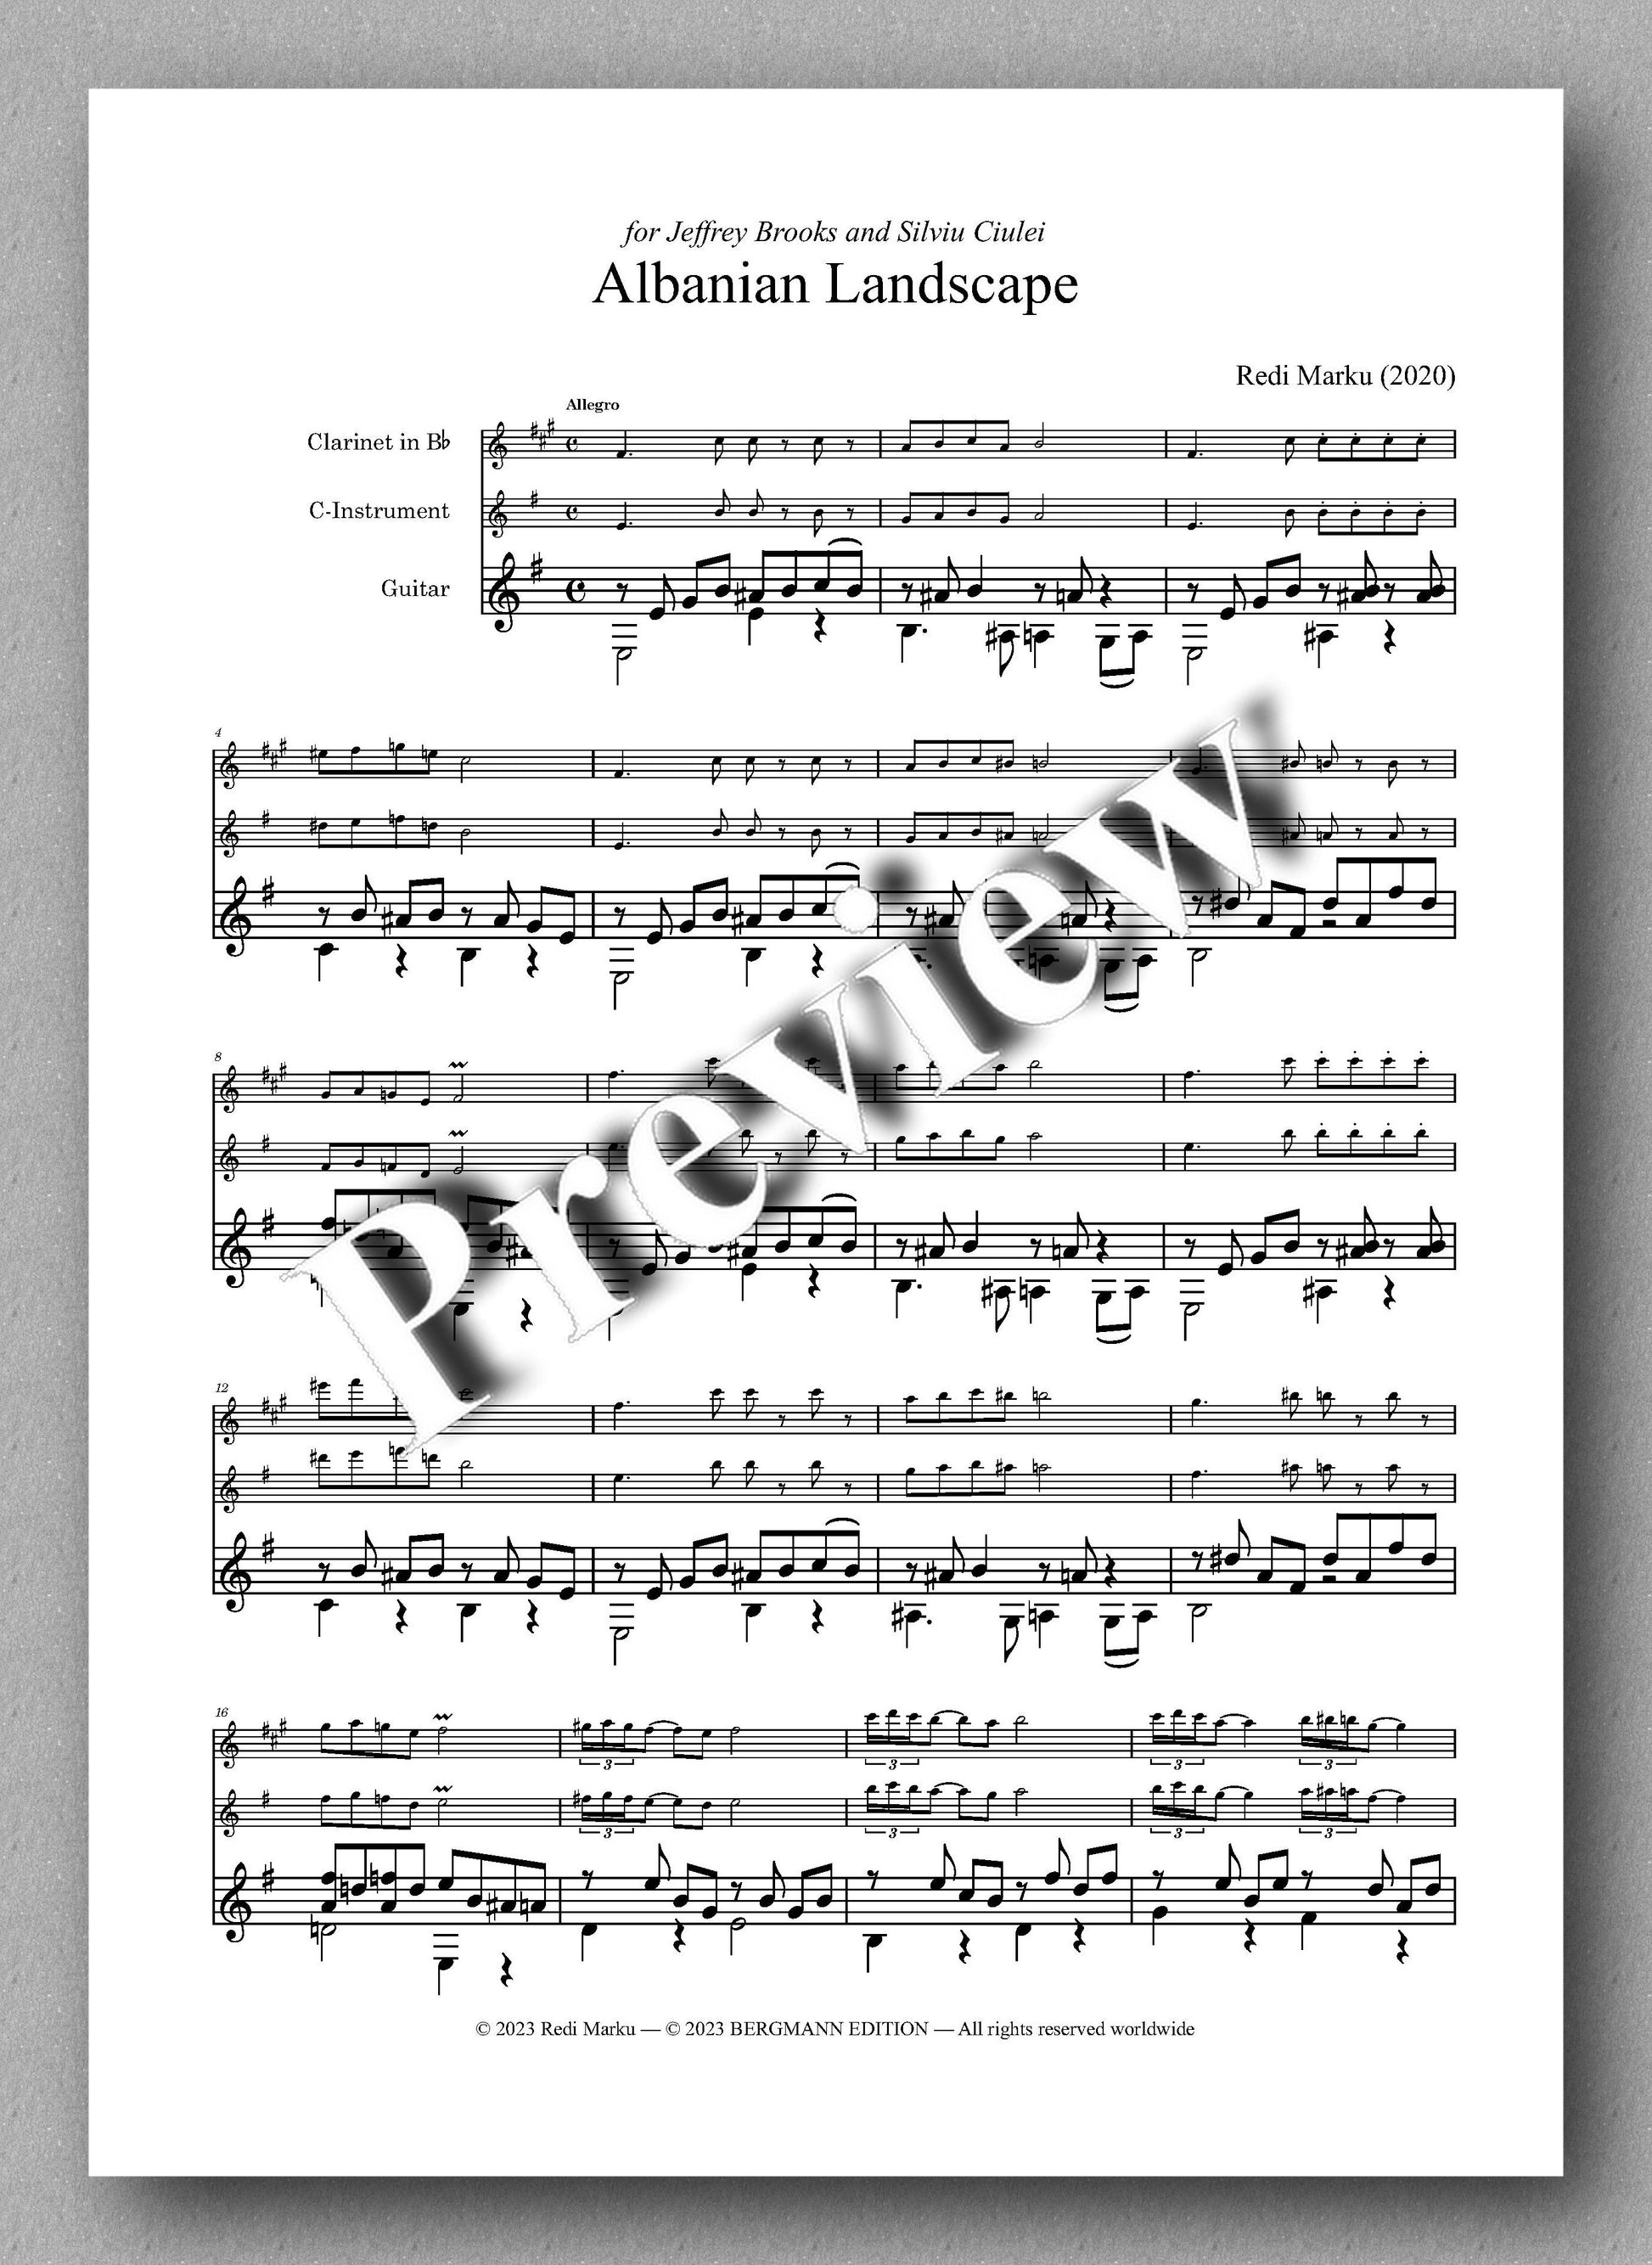 Albanian Landscape by Redi Marku - preview of the music score 1